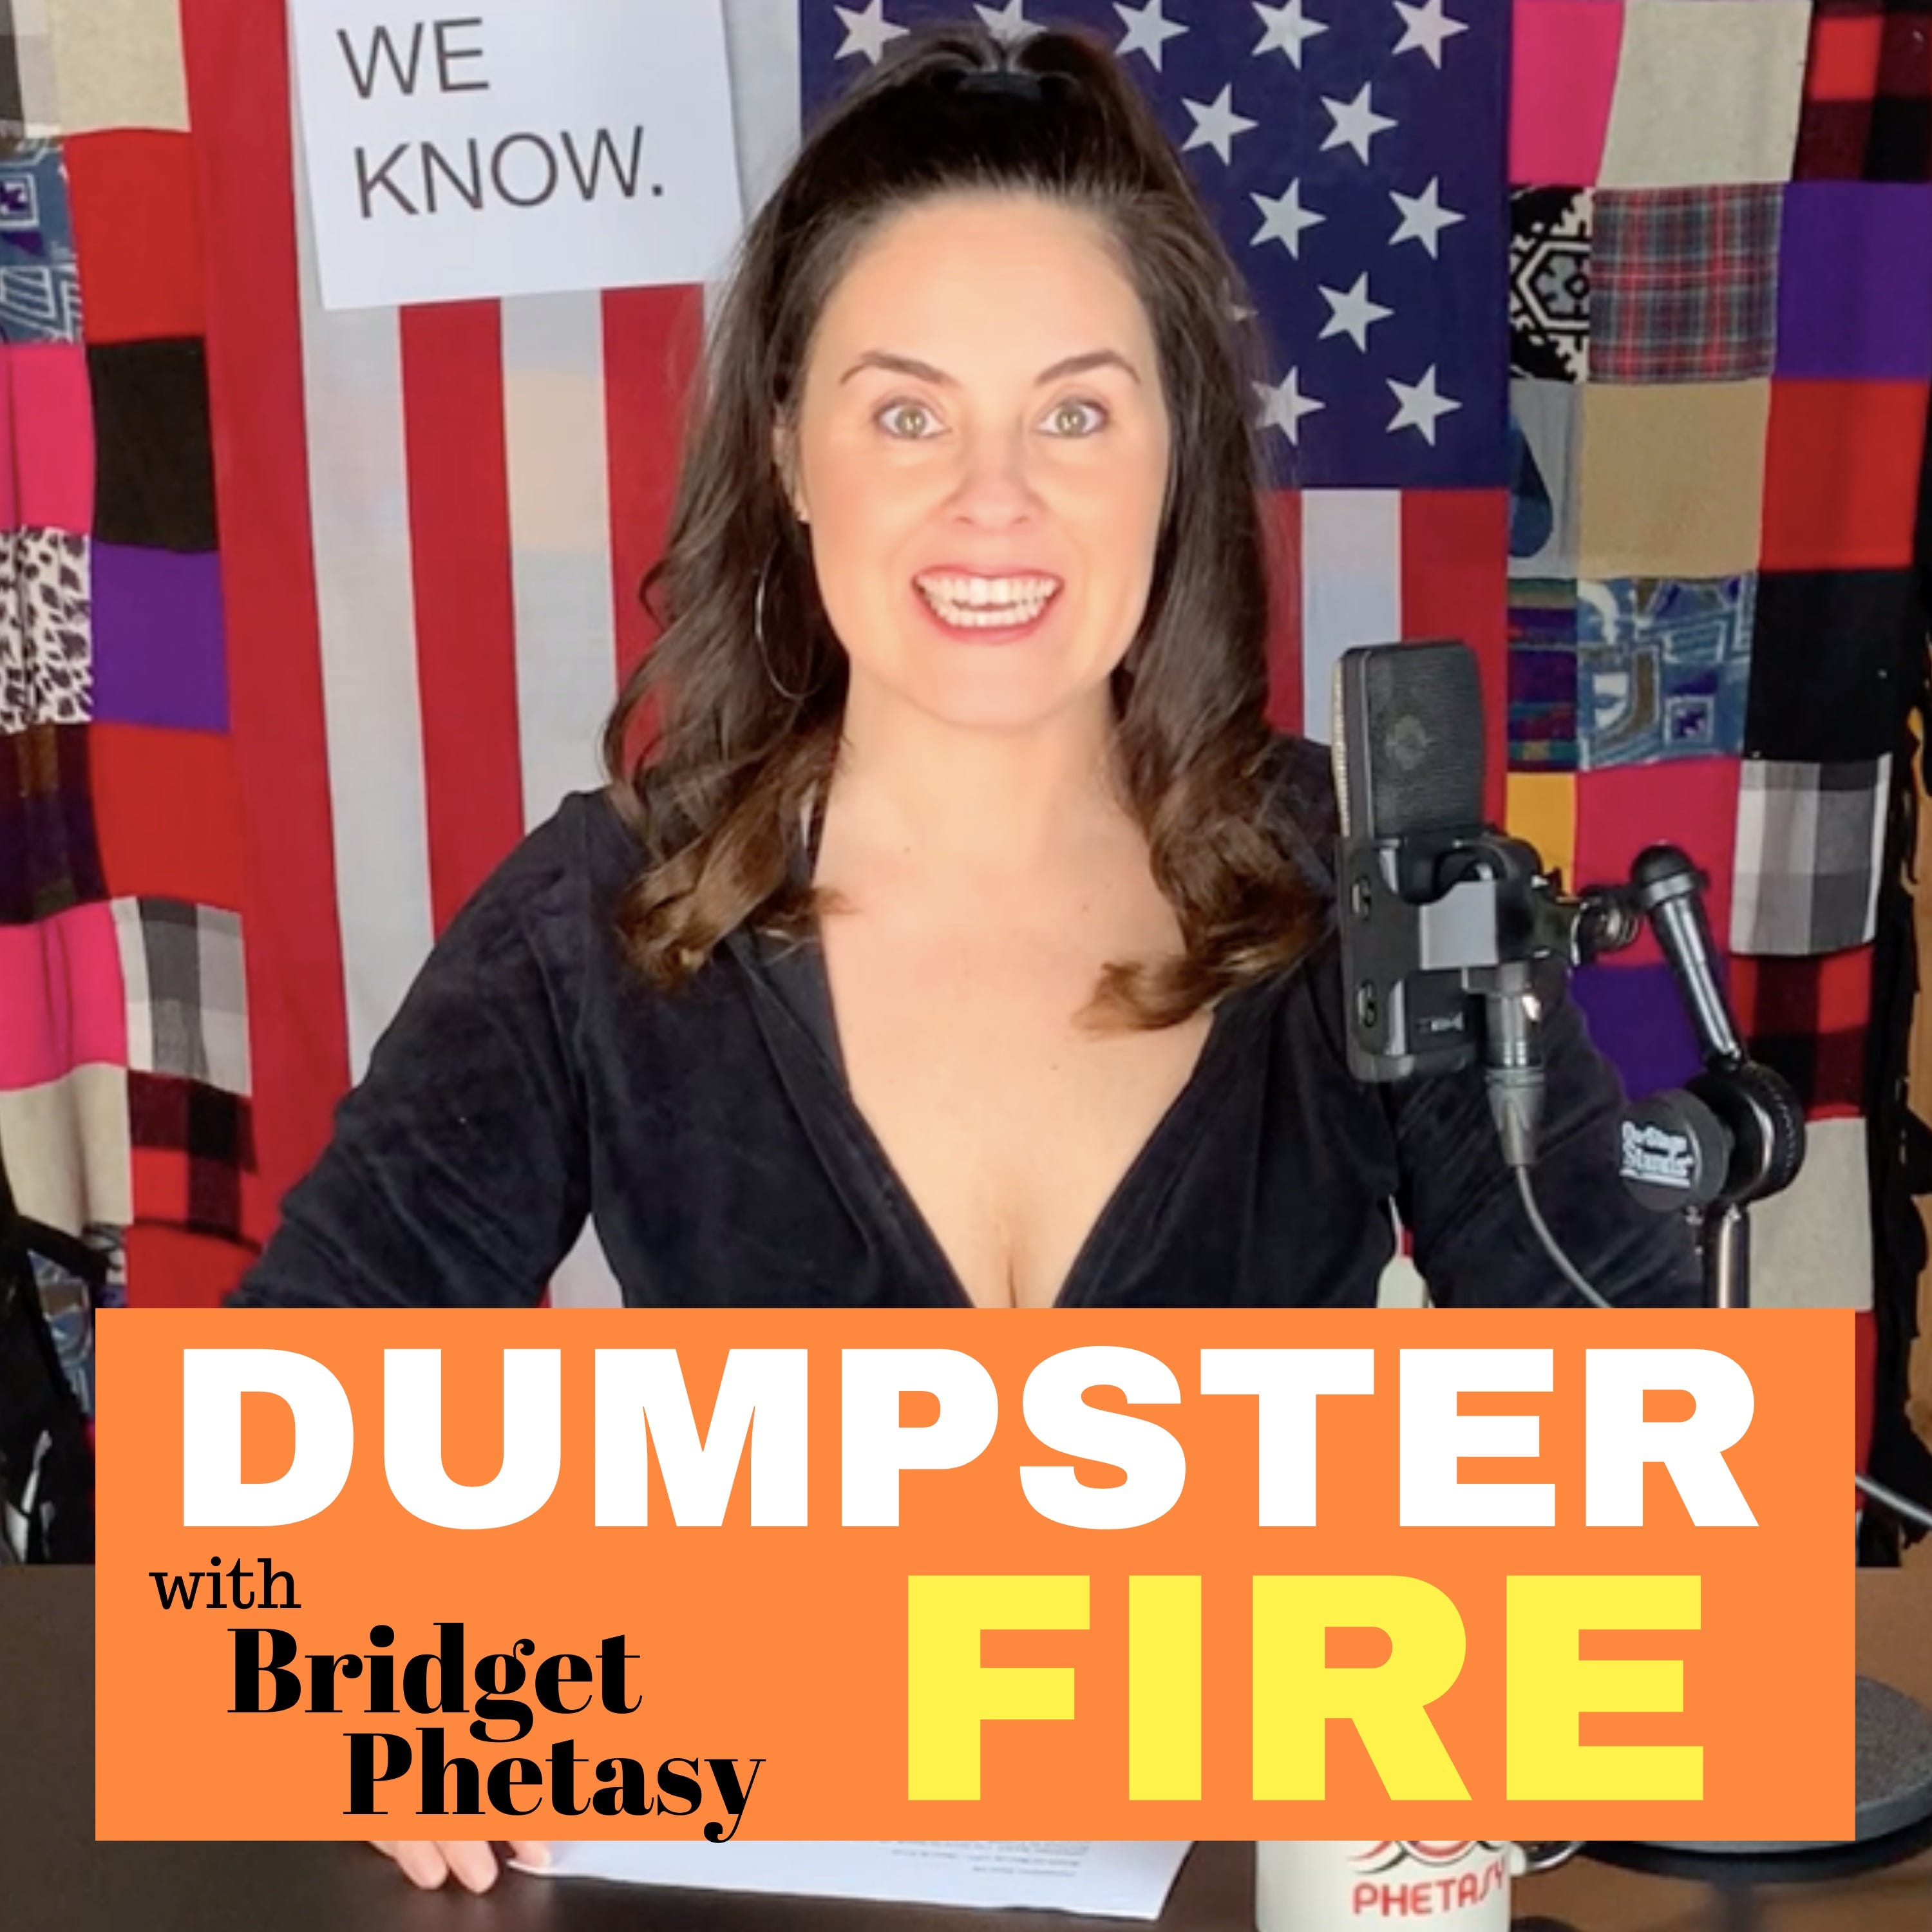 Dumpster Fire 20 - Dear Leader vs. America's Spicy Butthole